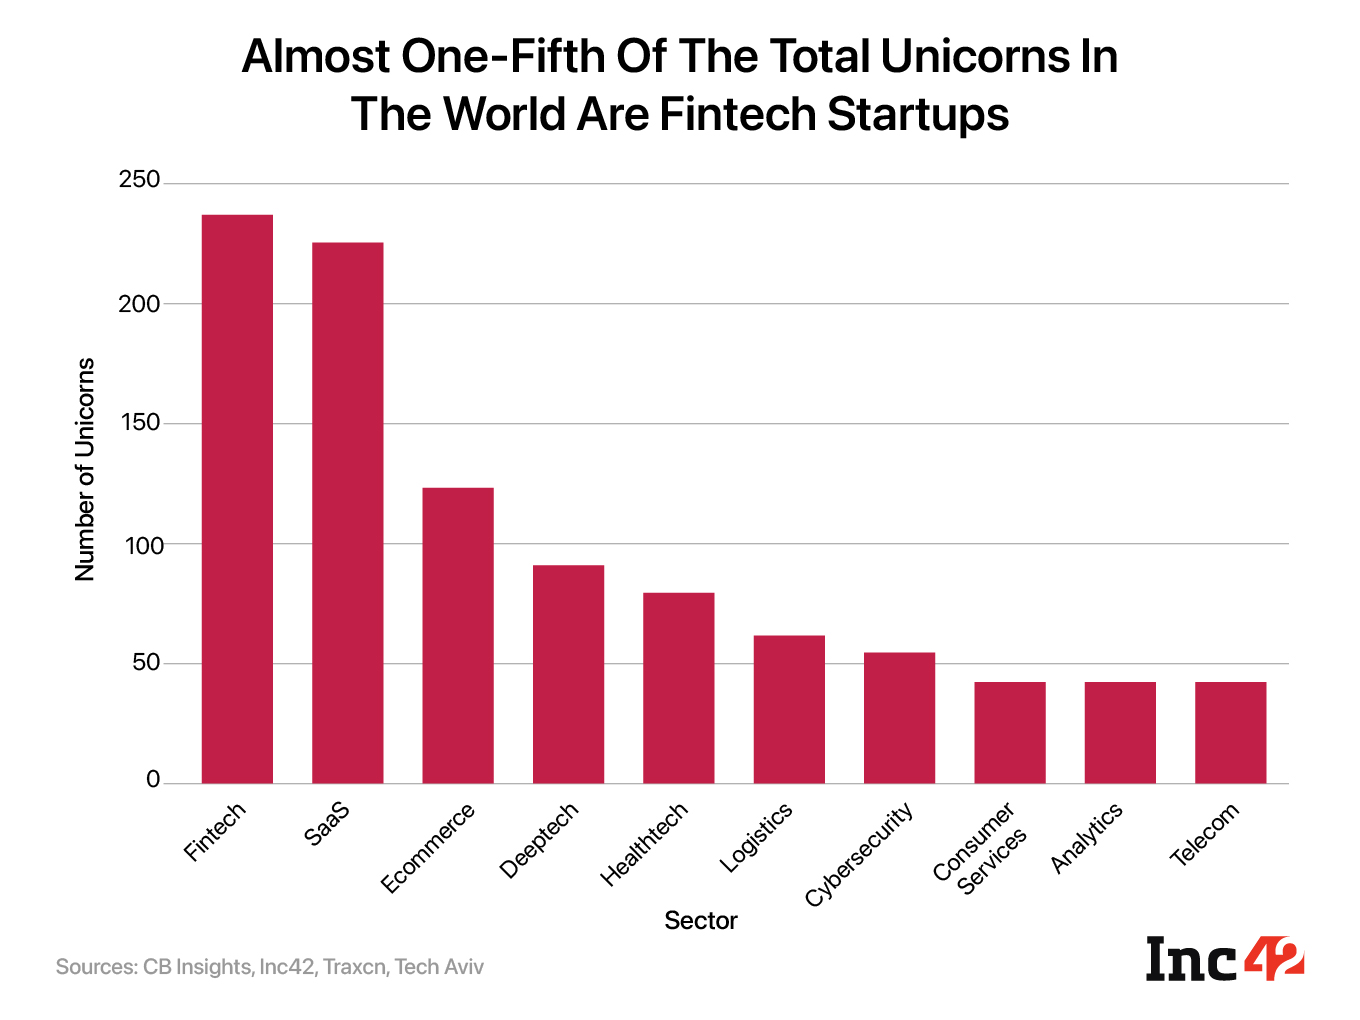 Almost one-fifth of the total unicorns in the world are fintech startups